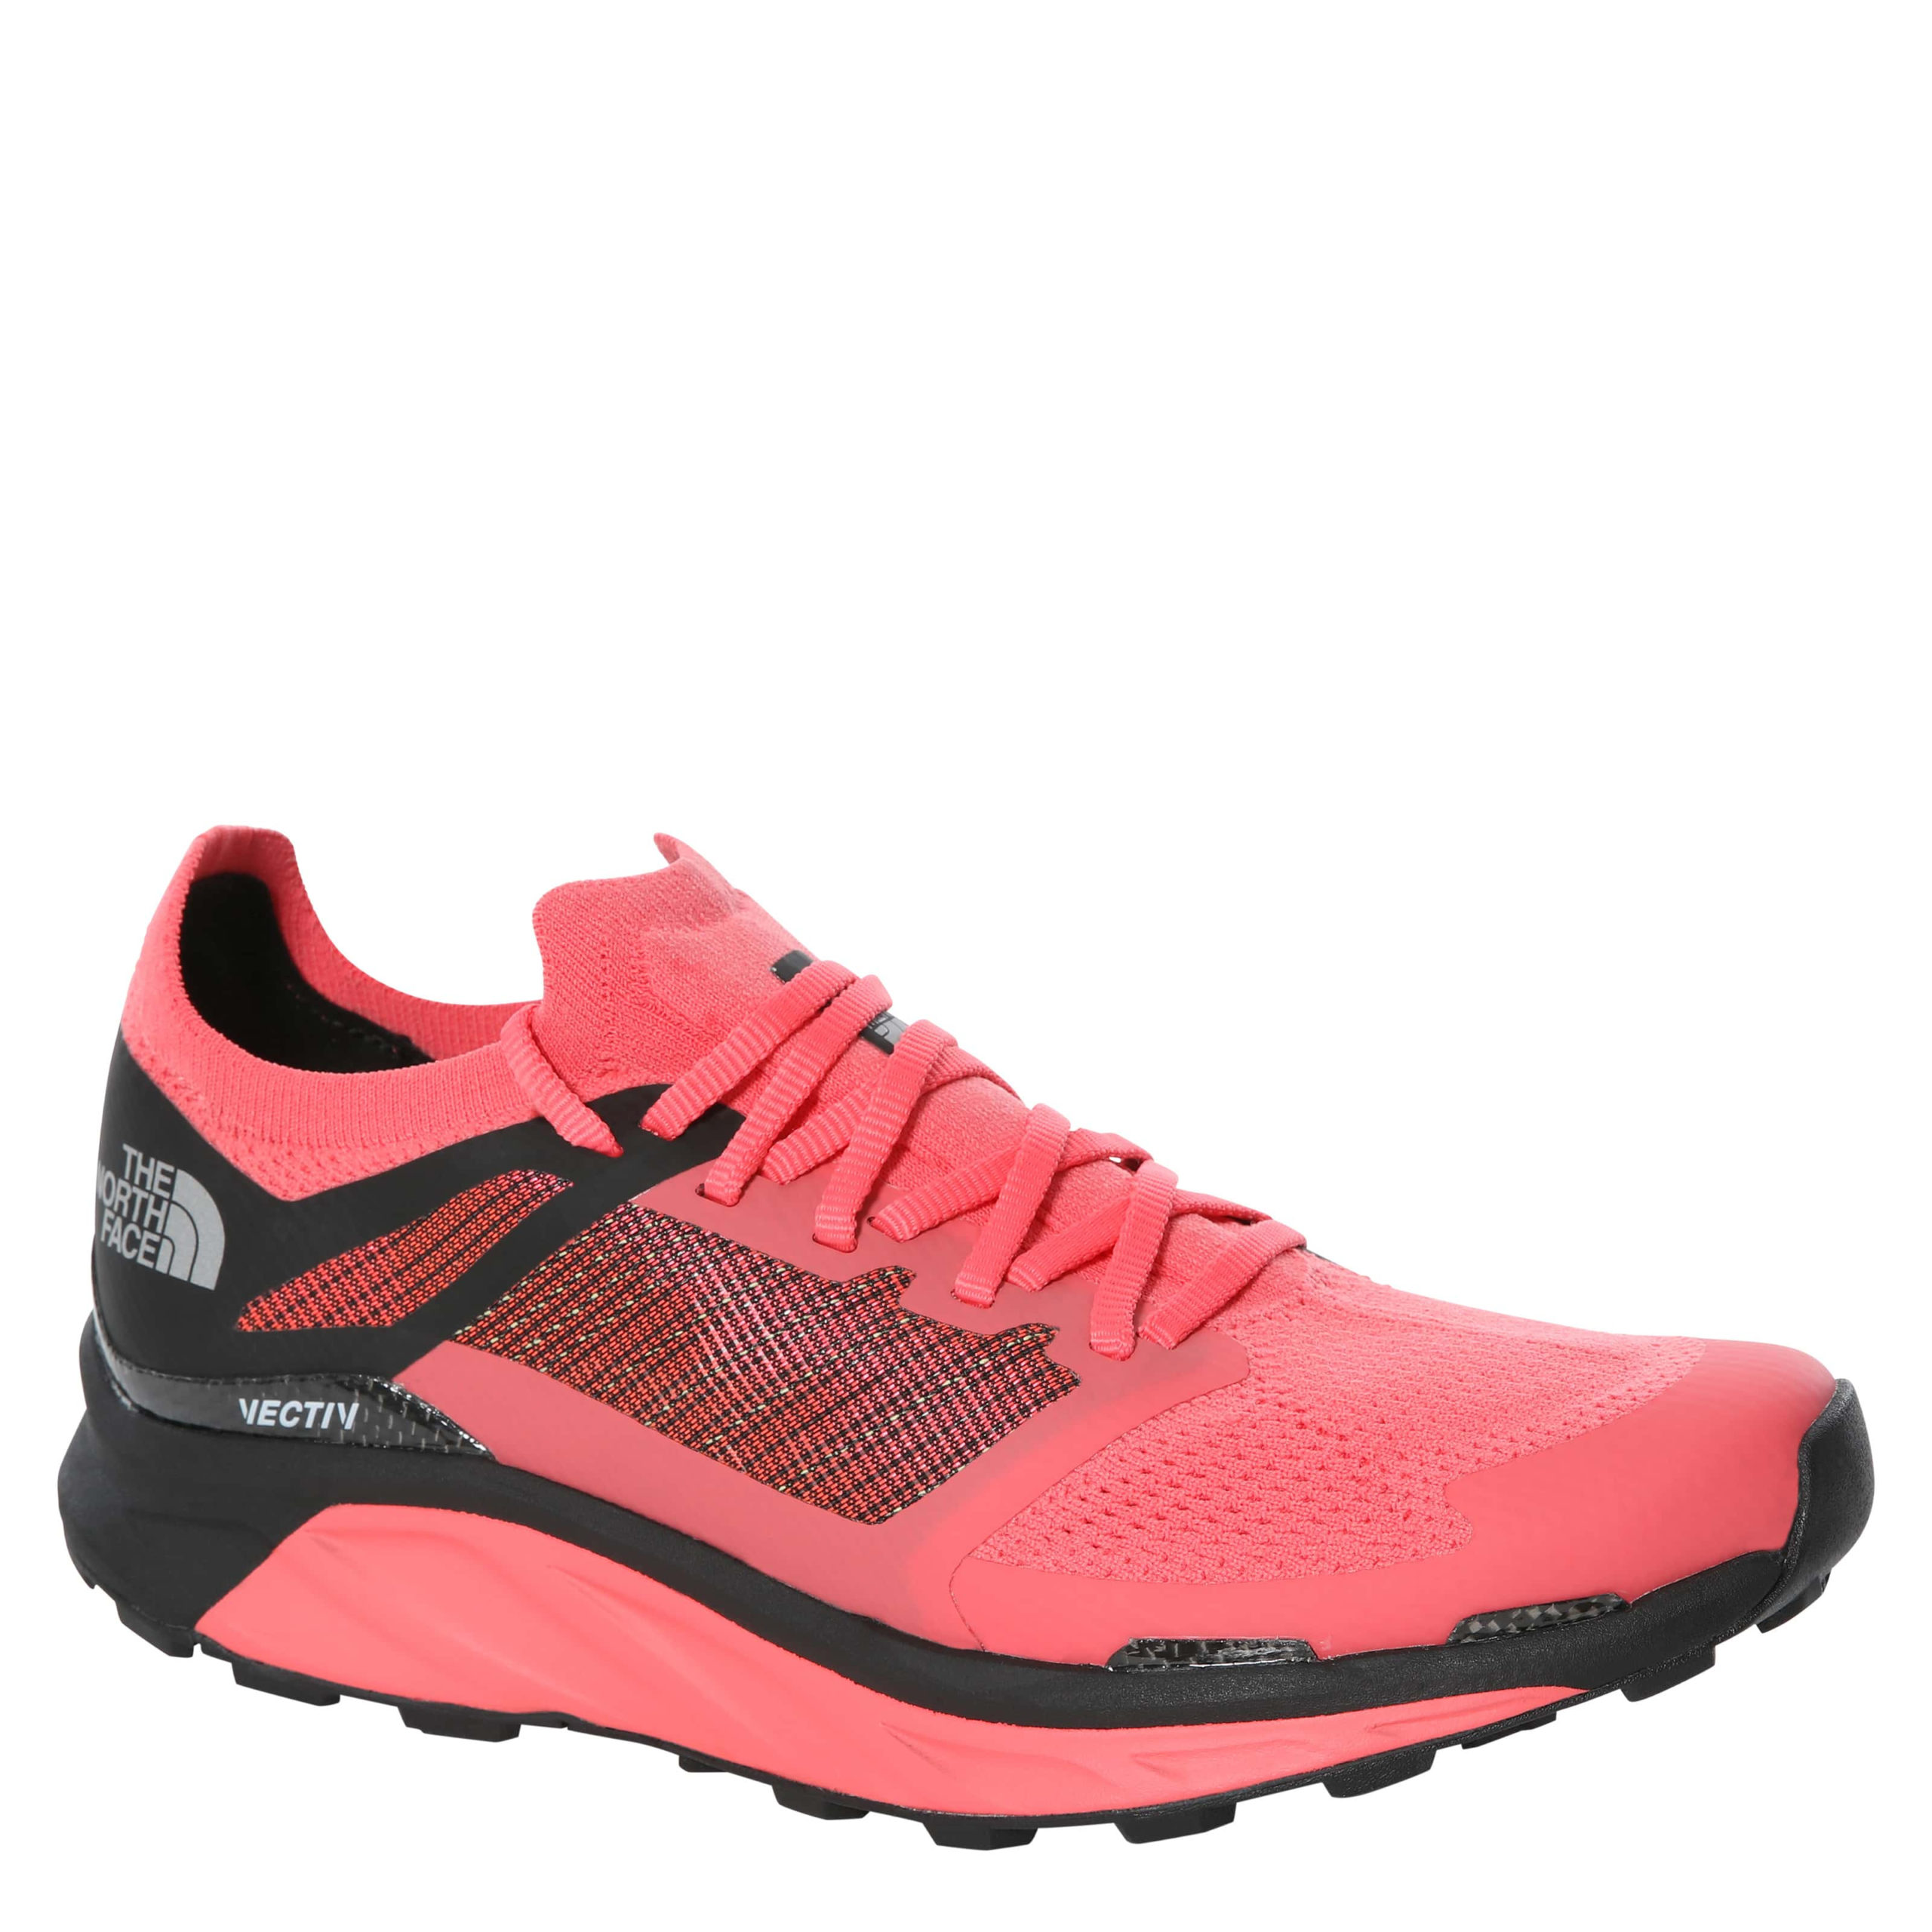 The North Face Woman Flight Vectiv (Fiesta Red/TNF Black) dame-0